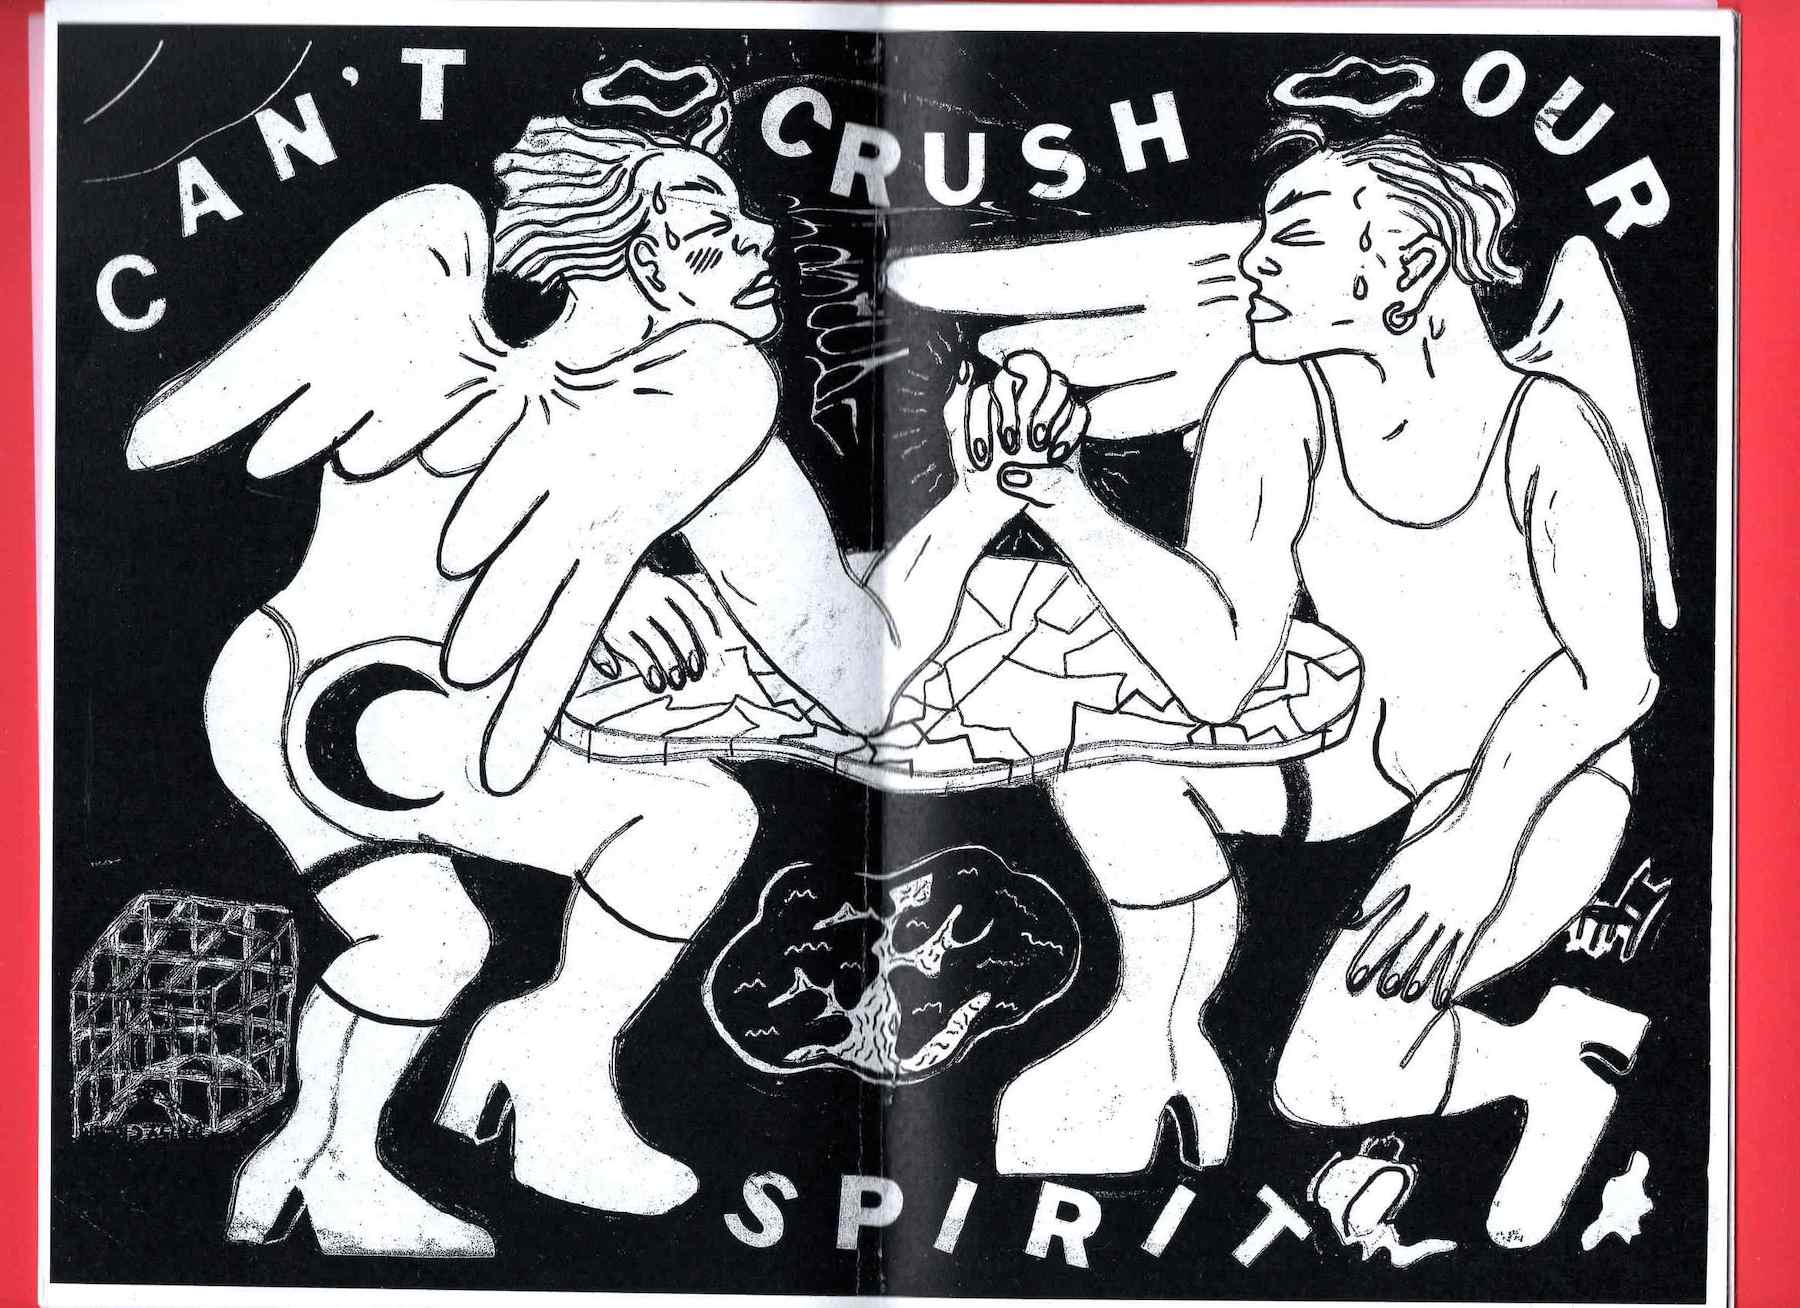 Two-page, black and white spread two winged figures locking hands over a cracked surface. Large text along the top and bottom of the image reads 'CAN'T CRUSH OUR SPIRIT'